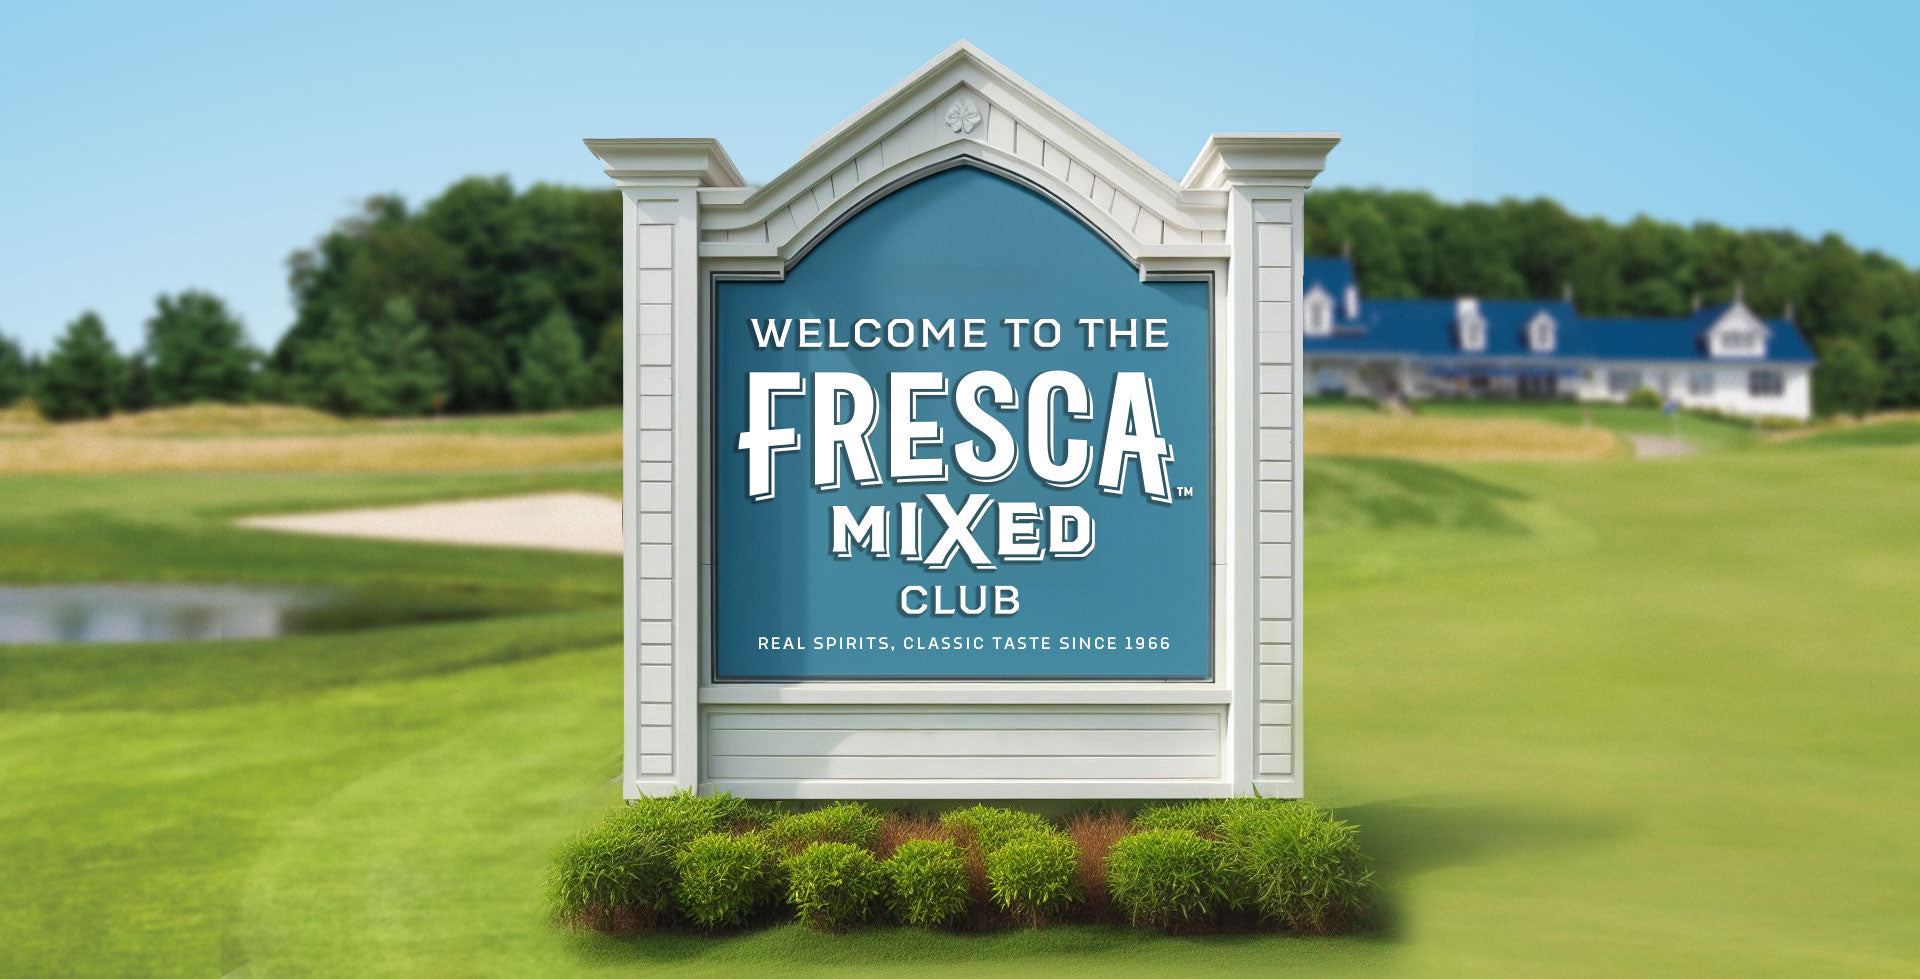 Welcome to the Fresca Mixed Club